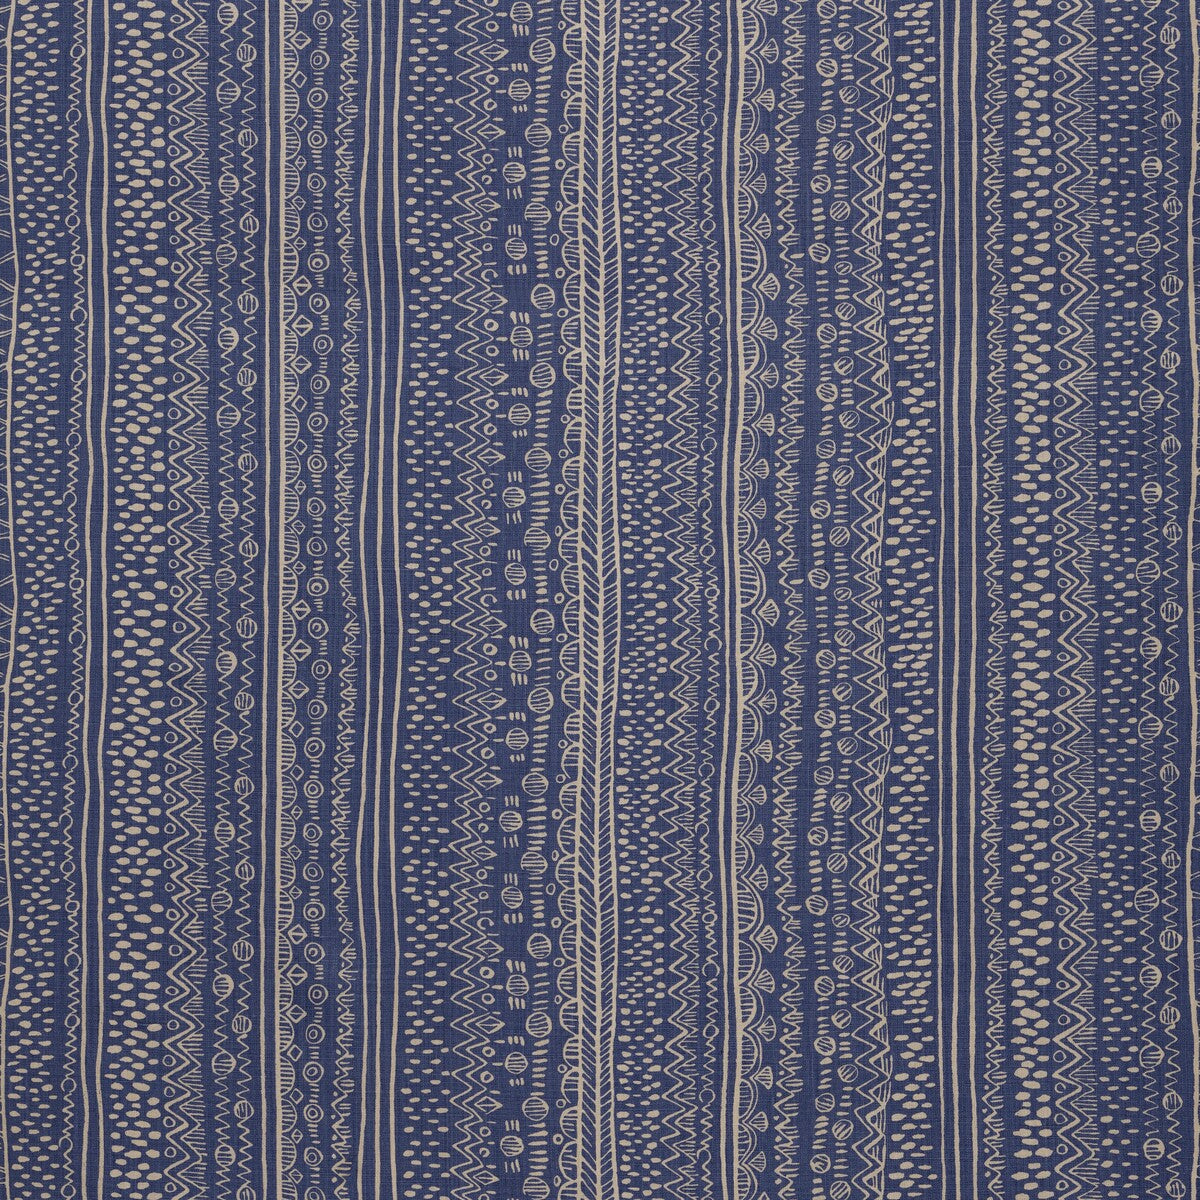 Kirby fabric in midnight color - pattern BFC-3668.5.0 - by Lee Jofa in the Blithfield collection